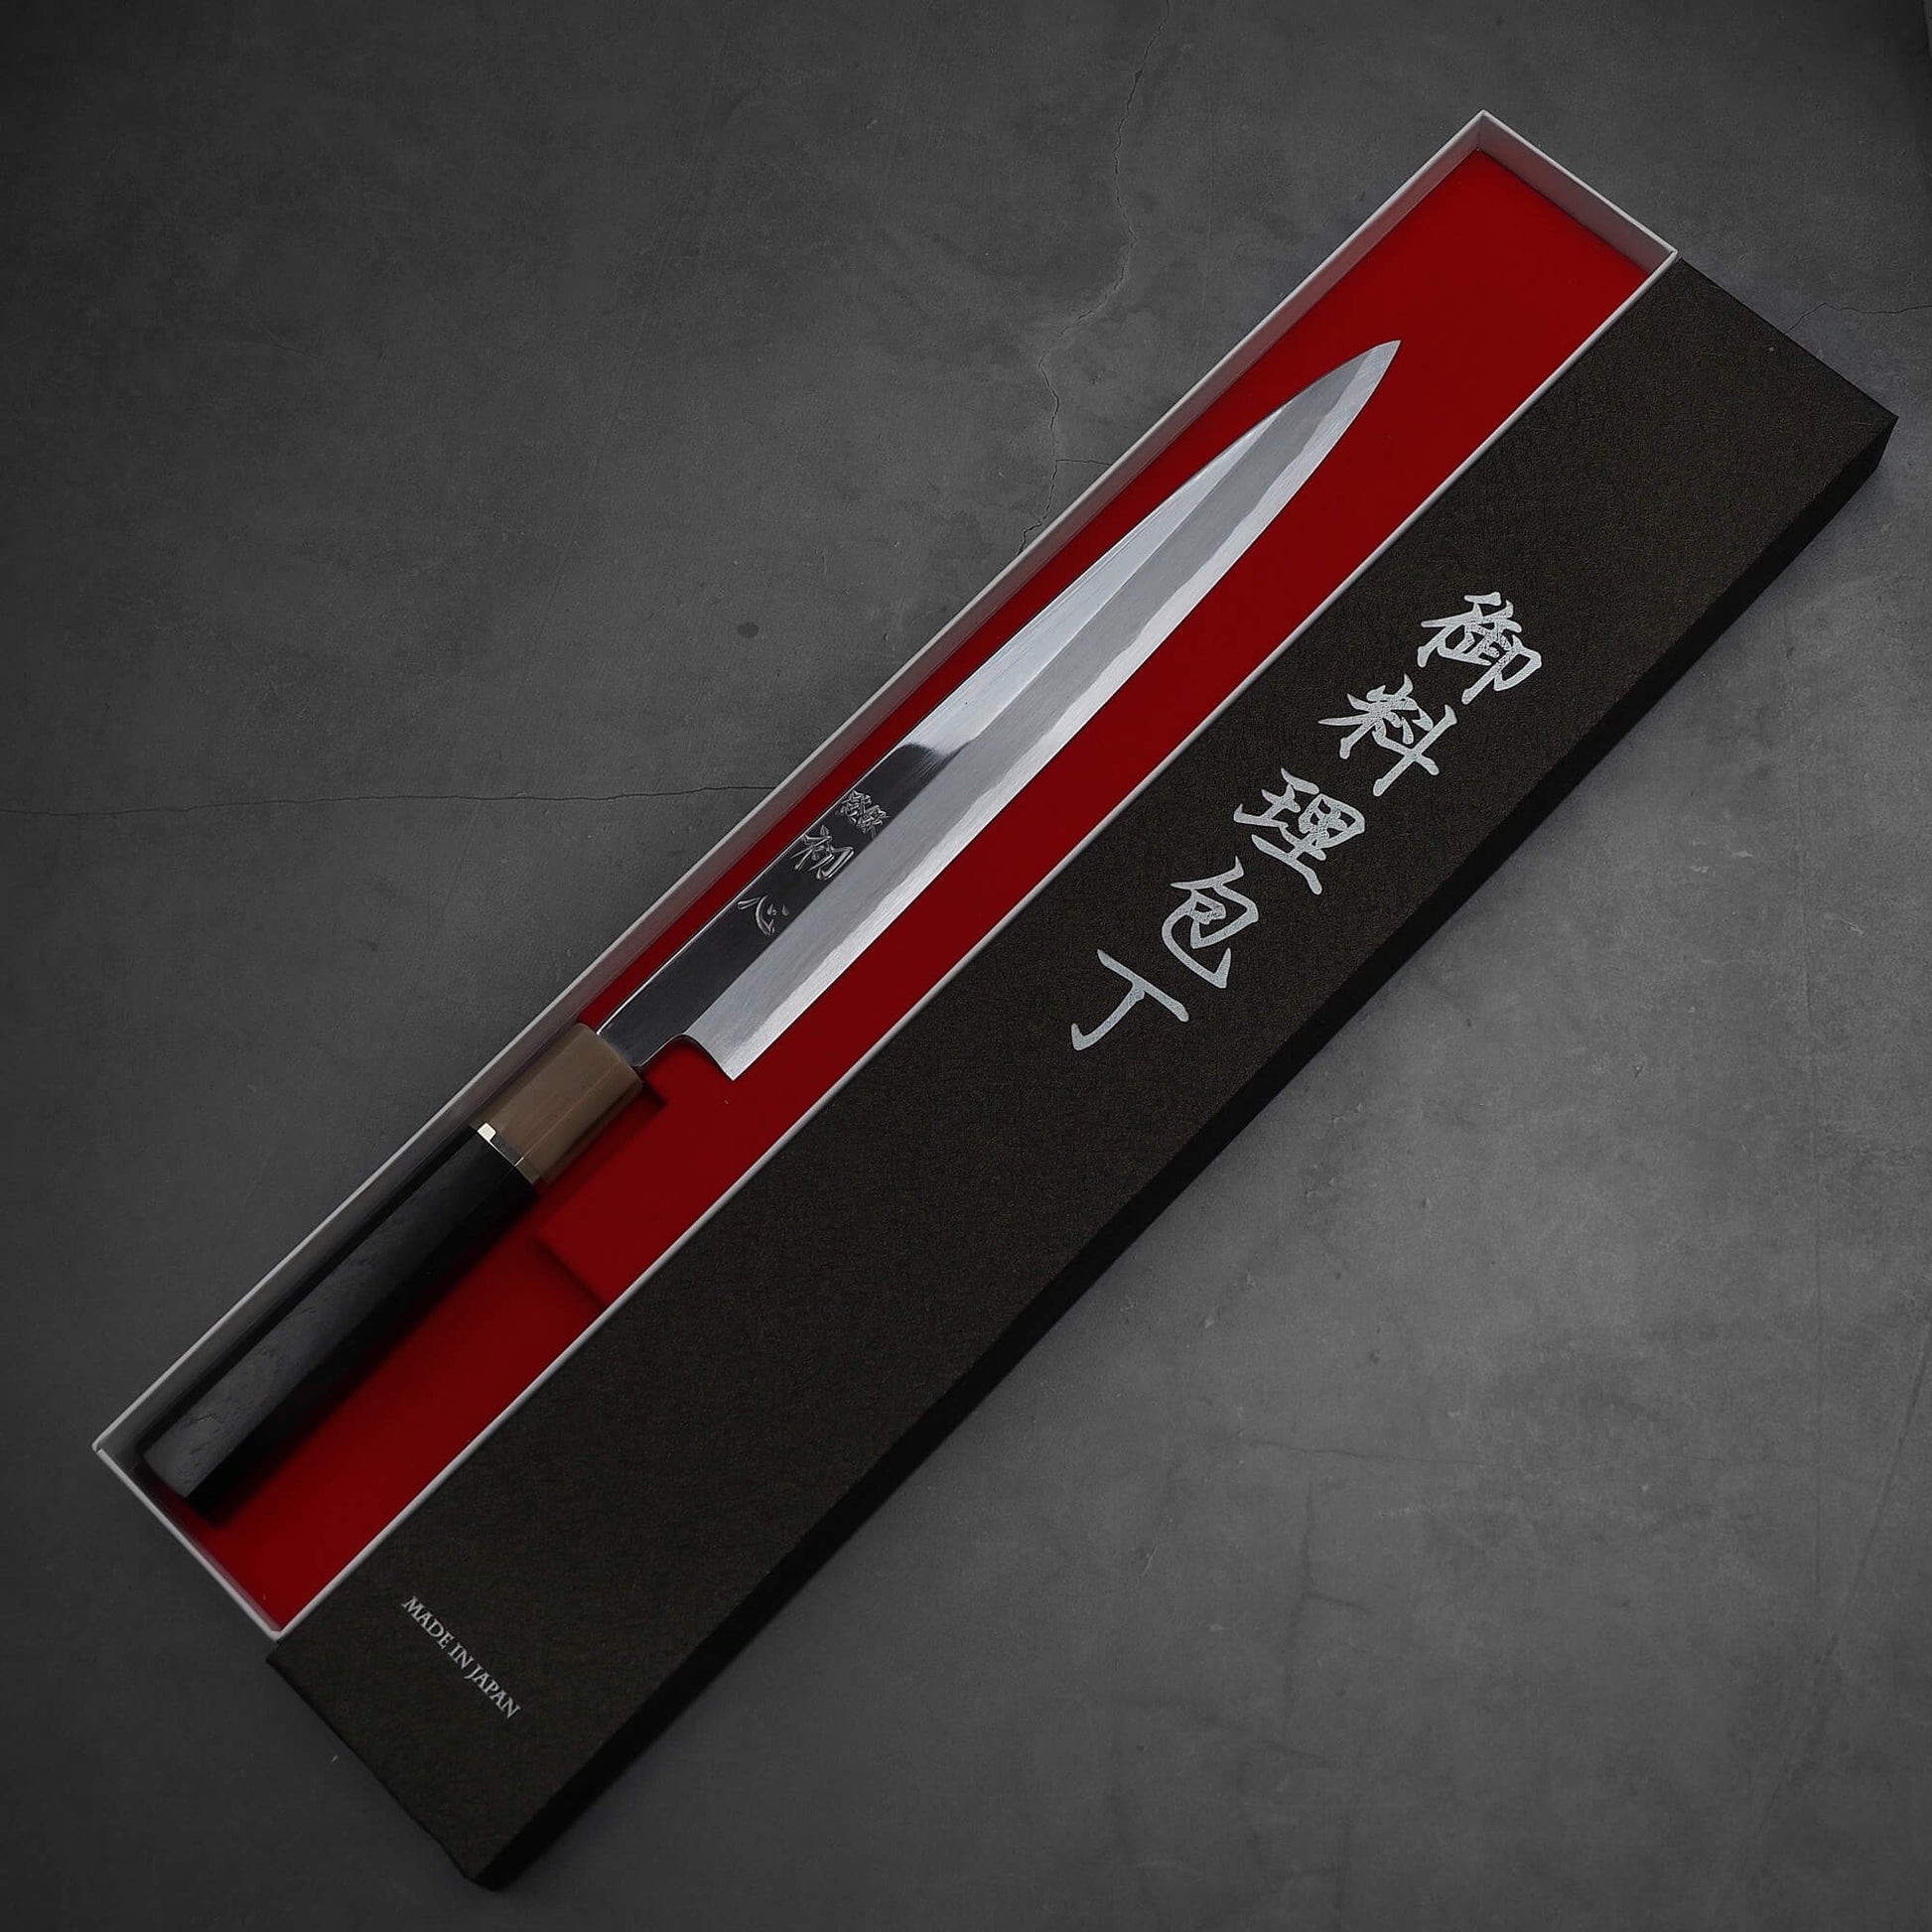 Top down view of Nakagawa yanagiba with aogami#1 steel. This sushi knife is sharpened by Morihiro hamono. The knife is in its box